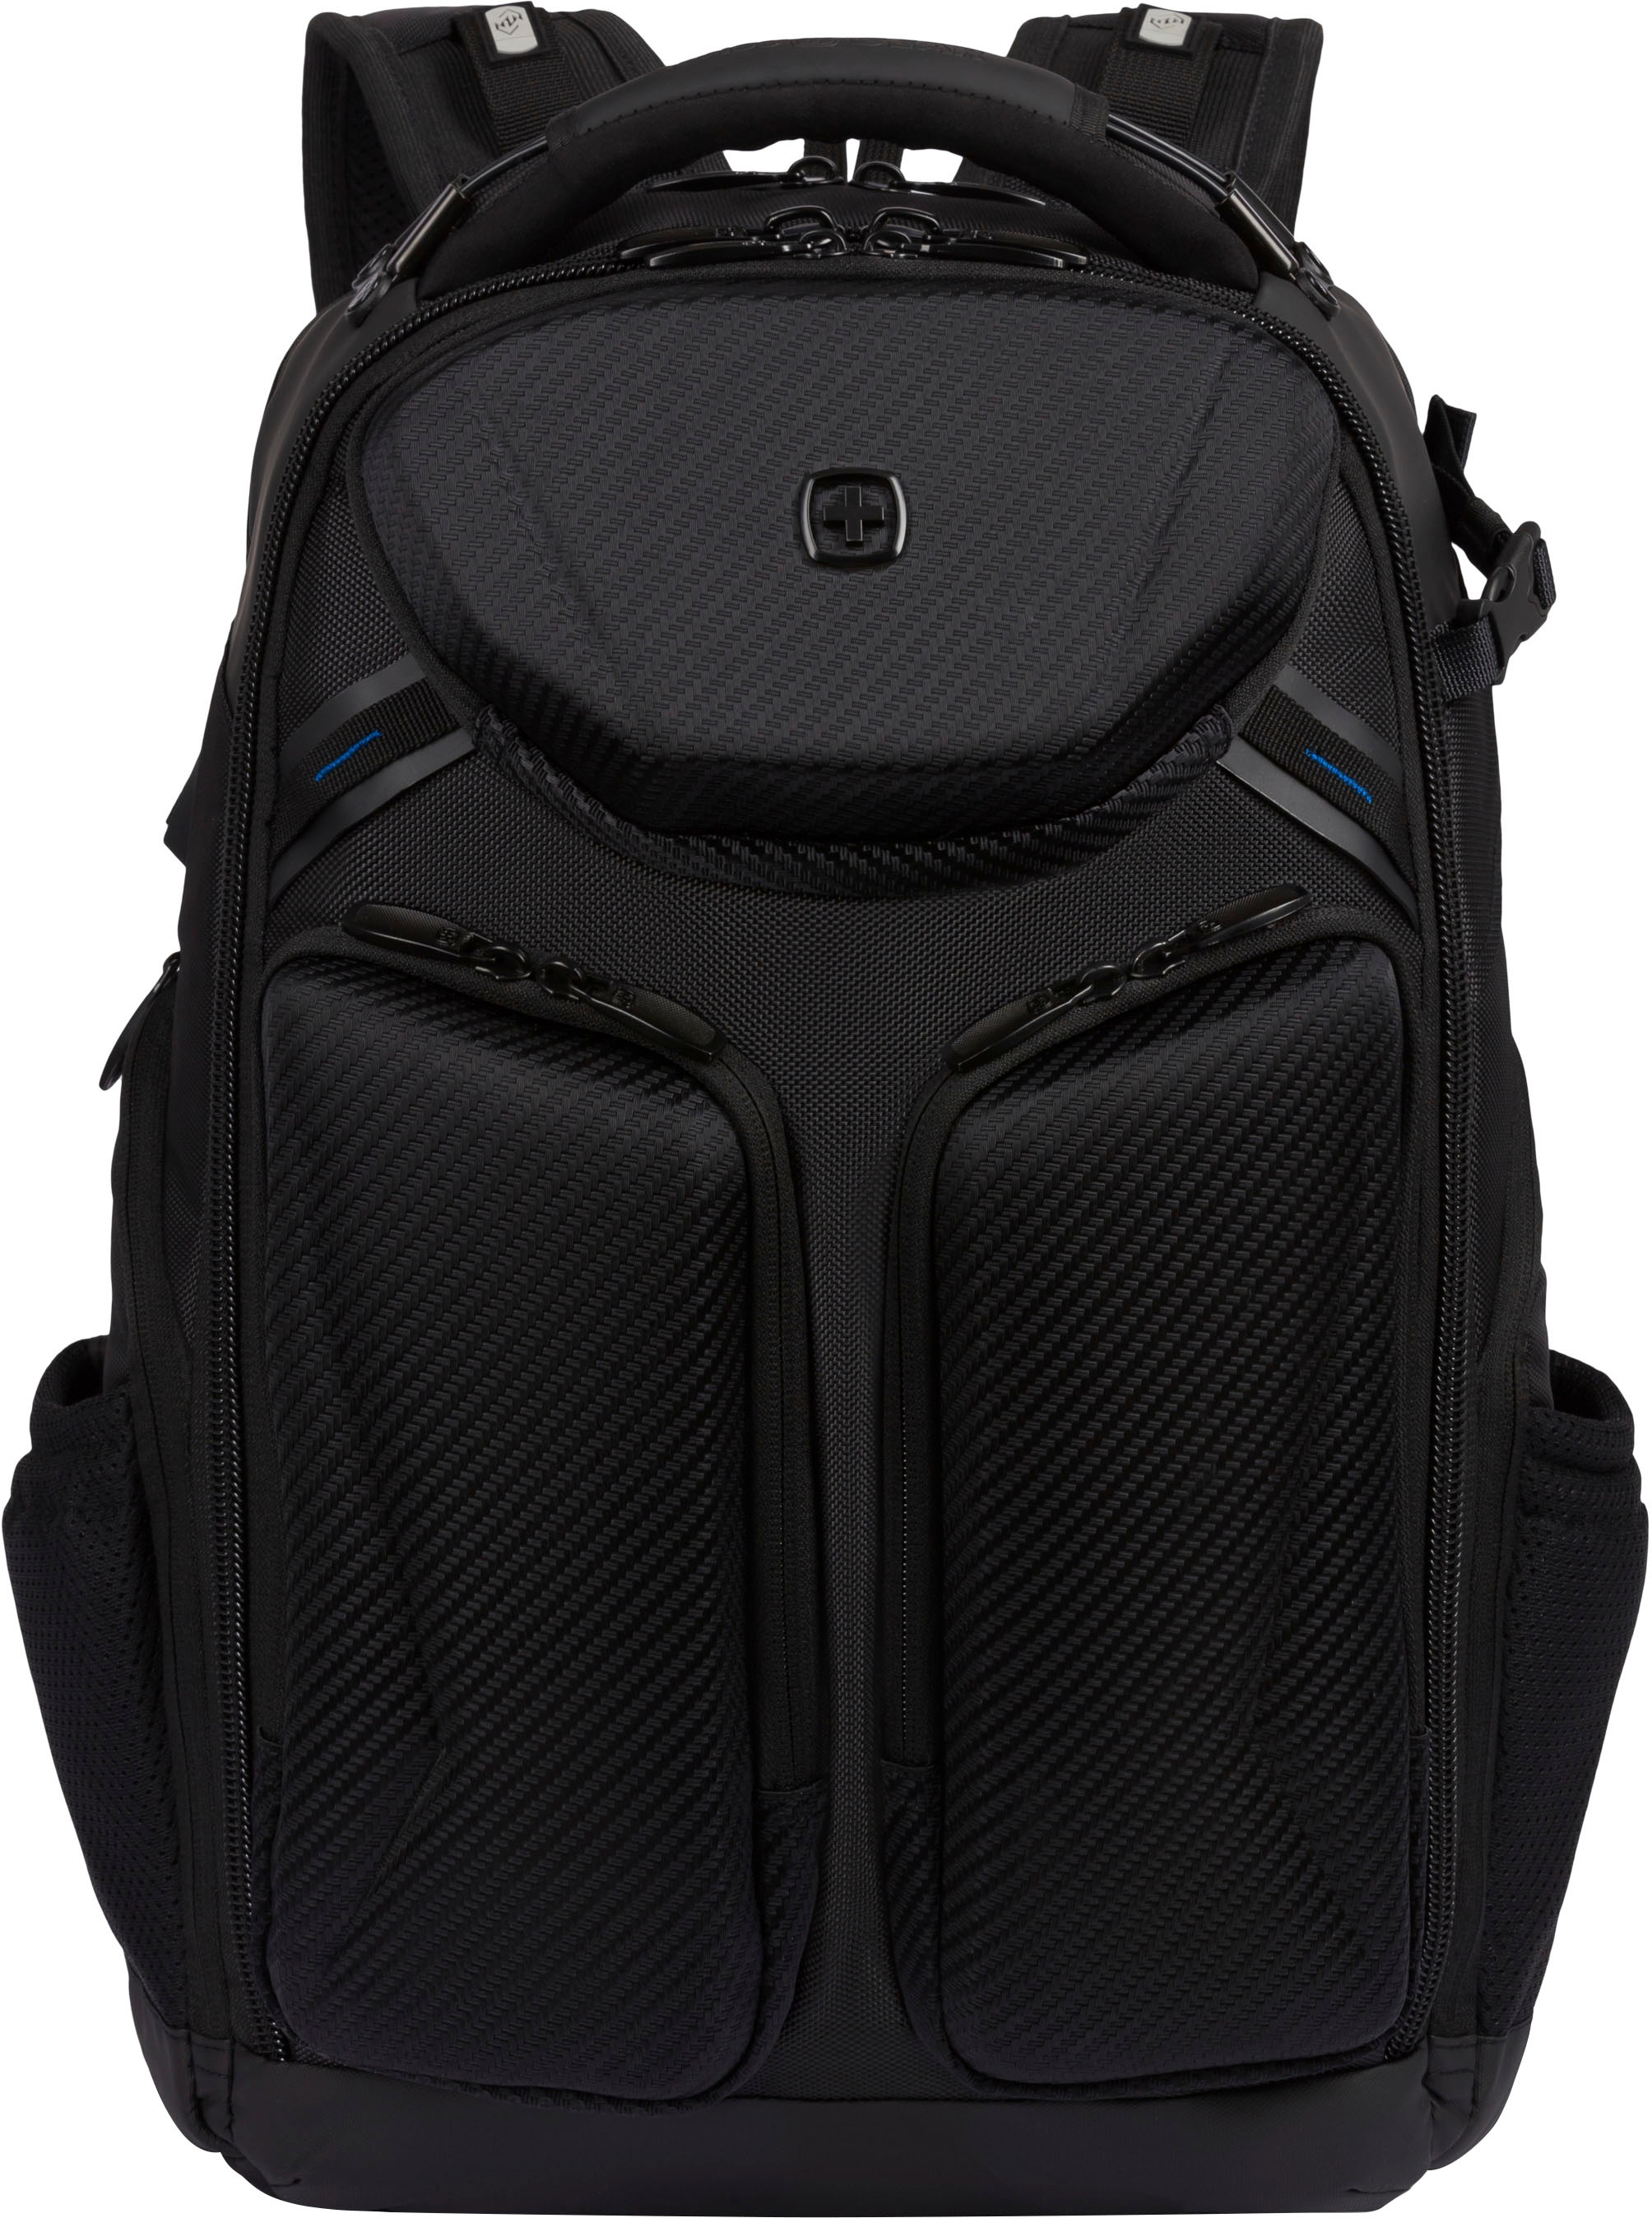 Best Buy: SwissGear Campaign Gamer Backpack fits up to 17.3